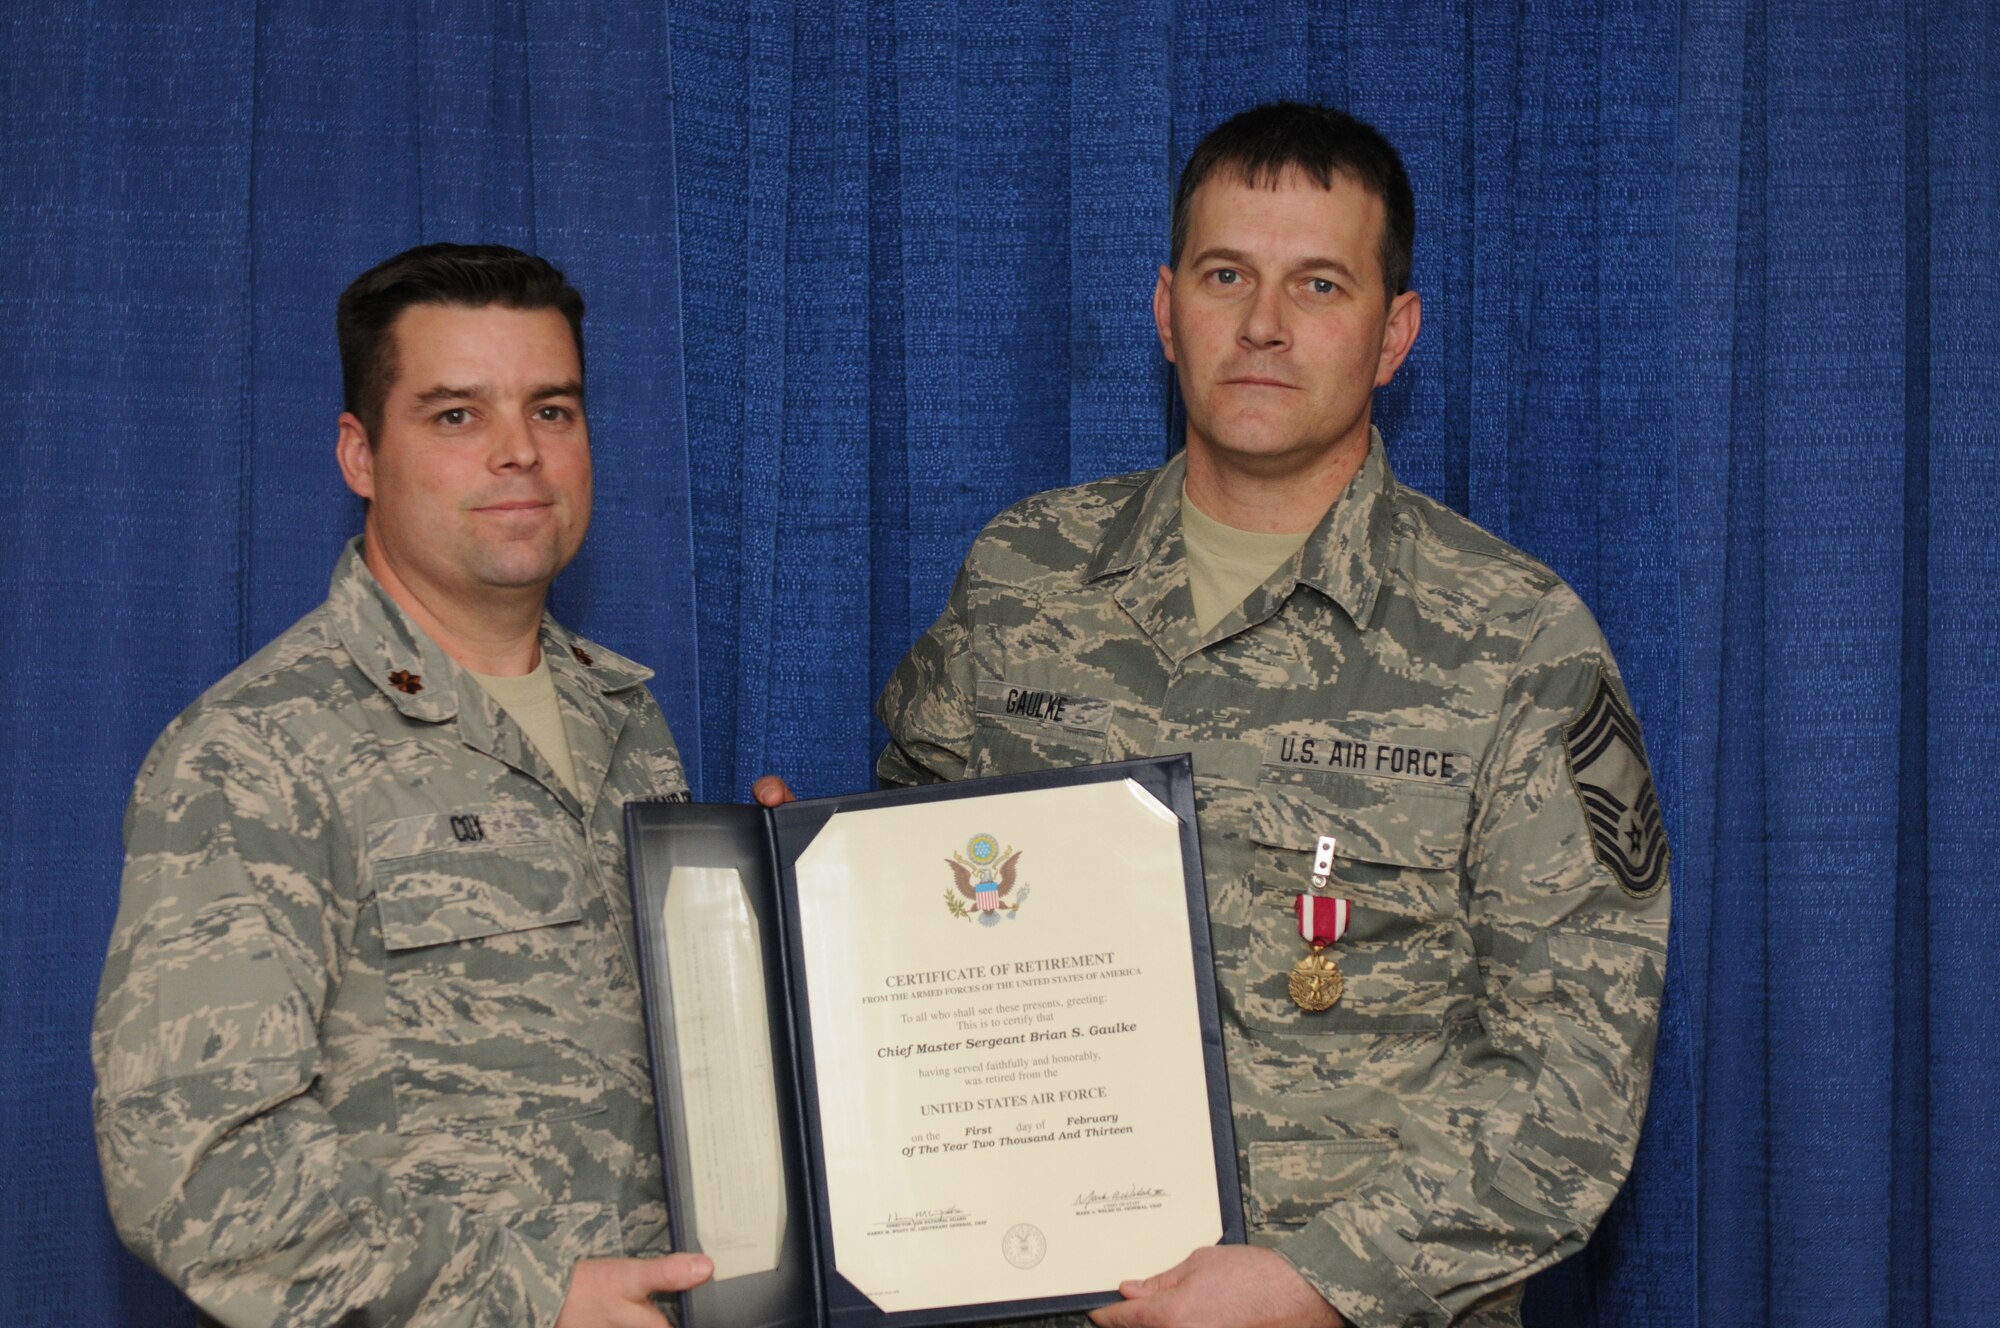 New York Air National Guard Chief Master Sgt. Brian Gaulke (right) receives a Certificate of Retirement from Maj. Patrick Cox, Commander 274th Air Support Operation Squadron, during a 2 February 2013 retirement ceremony held at Hancock Field Air National Guard Base, Syracuse, NY. Chief Gaulke also received a Meritorious Service Medal during the ceremony. Chief Gaulke was one of the first members of the 274th ASOS after it stood up at Hancock Field. (NY Air National Guard photo by Senior Airman Duane Morgan/Released)